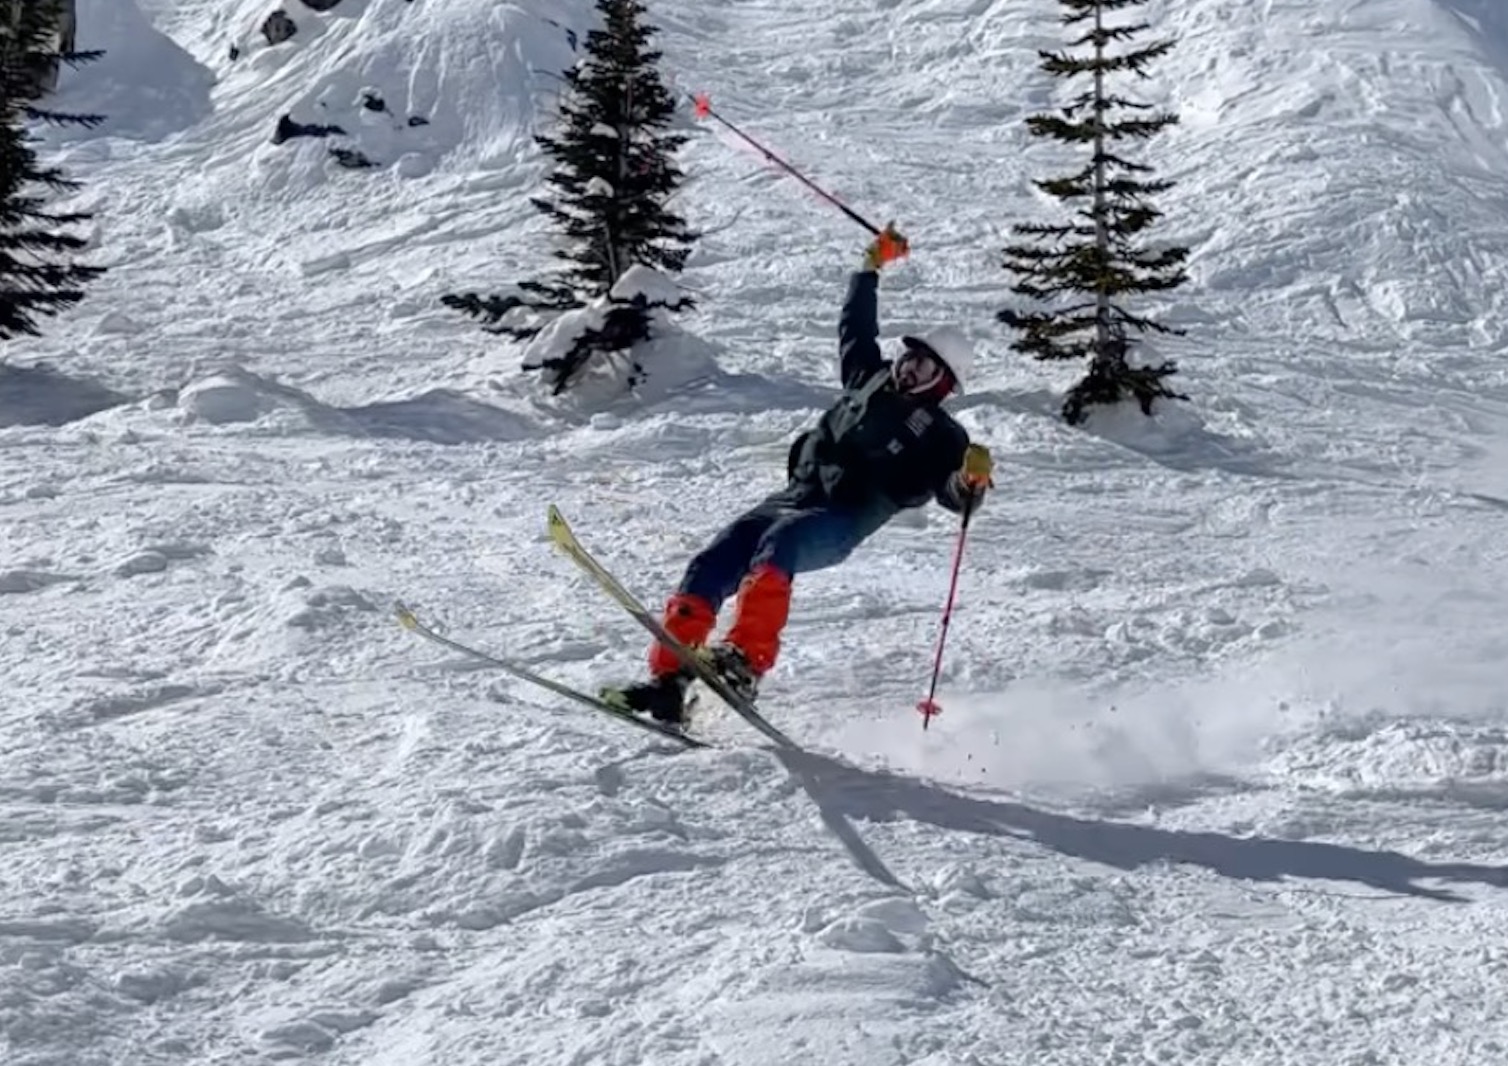 VIDEO: Jonny Moseley Gets A Private Lesson From "Maine’s Finest Skier"